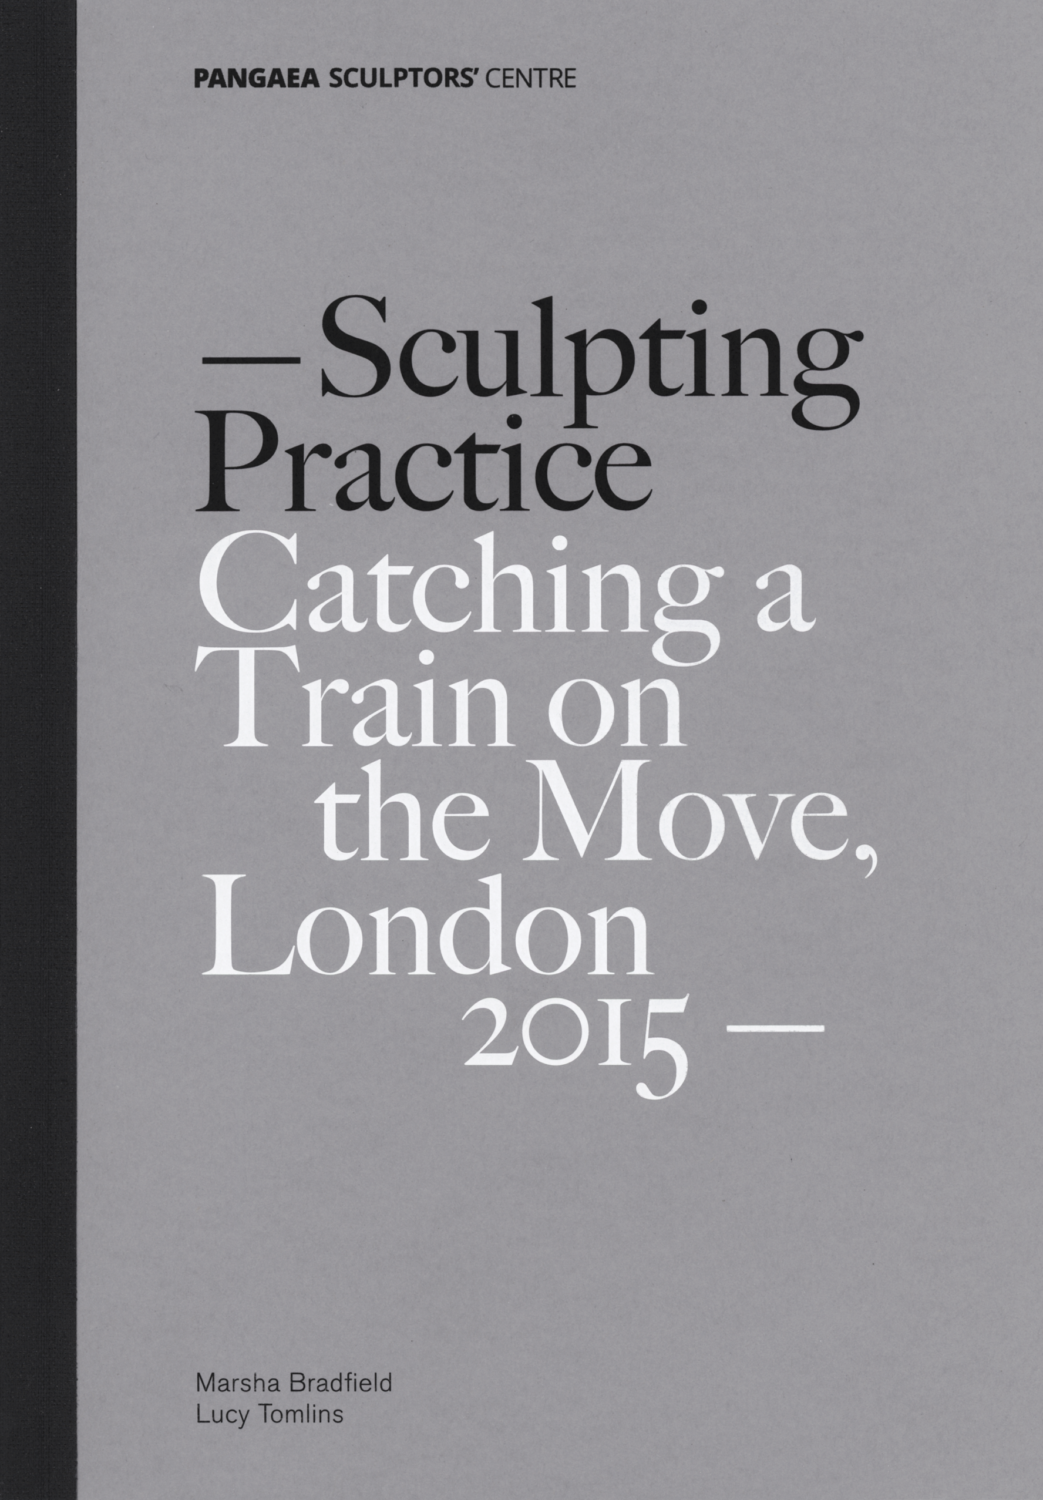 -Sculpting Practice, Catching a Train on the Move, London 2015-